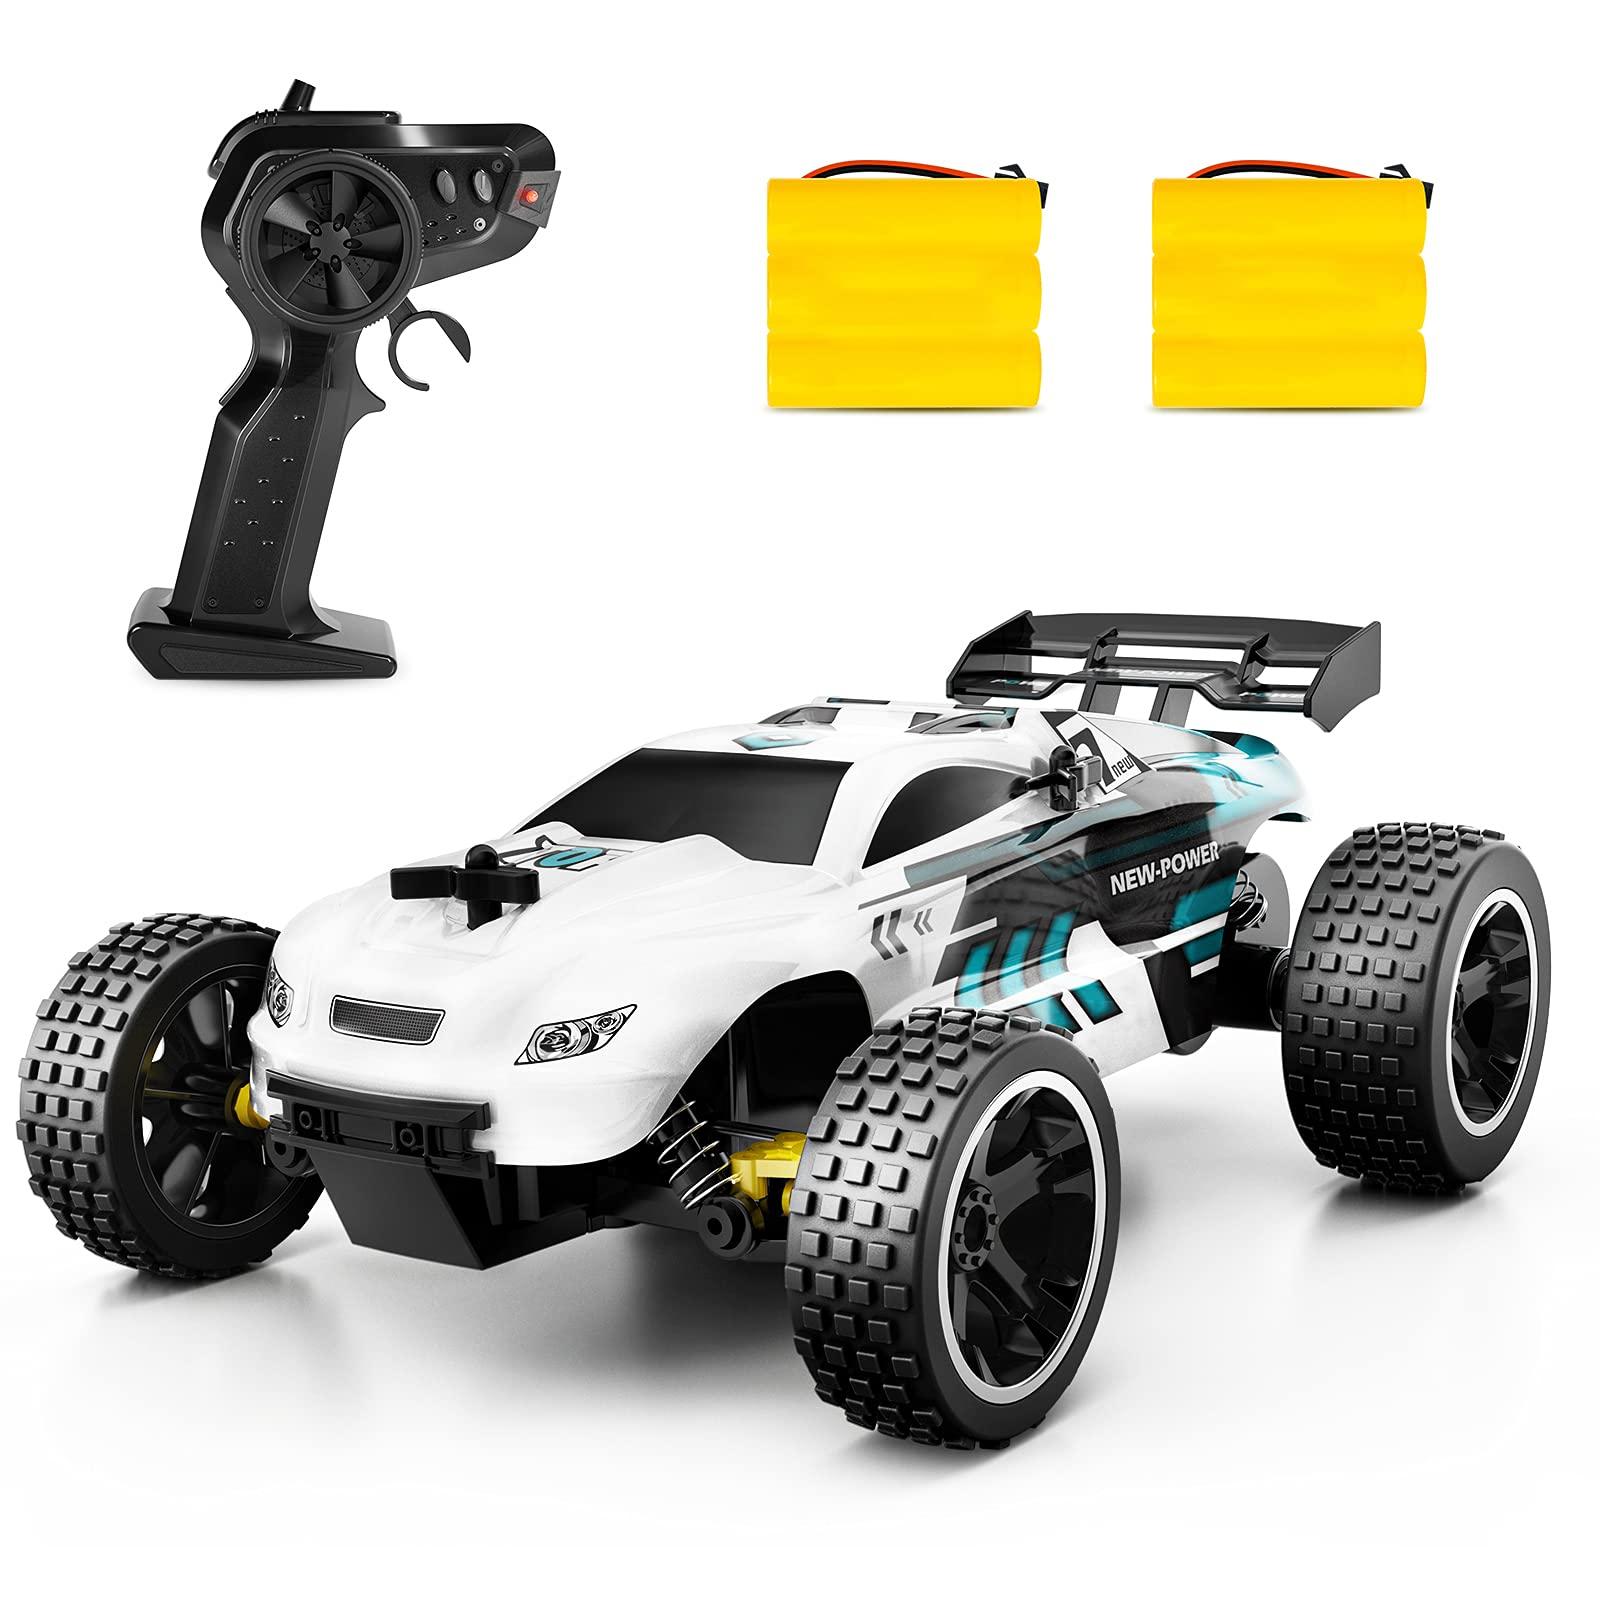 First Remote Control Car: Evolution of Remote Control Cars: From Simple Design to Modern Hobby